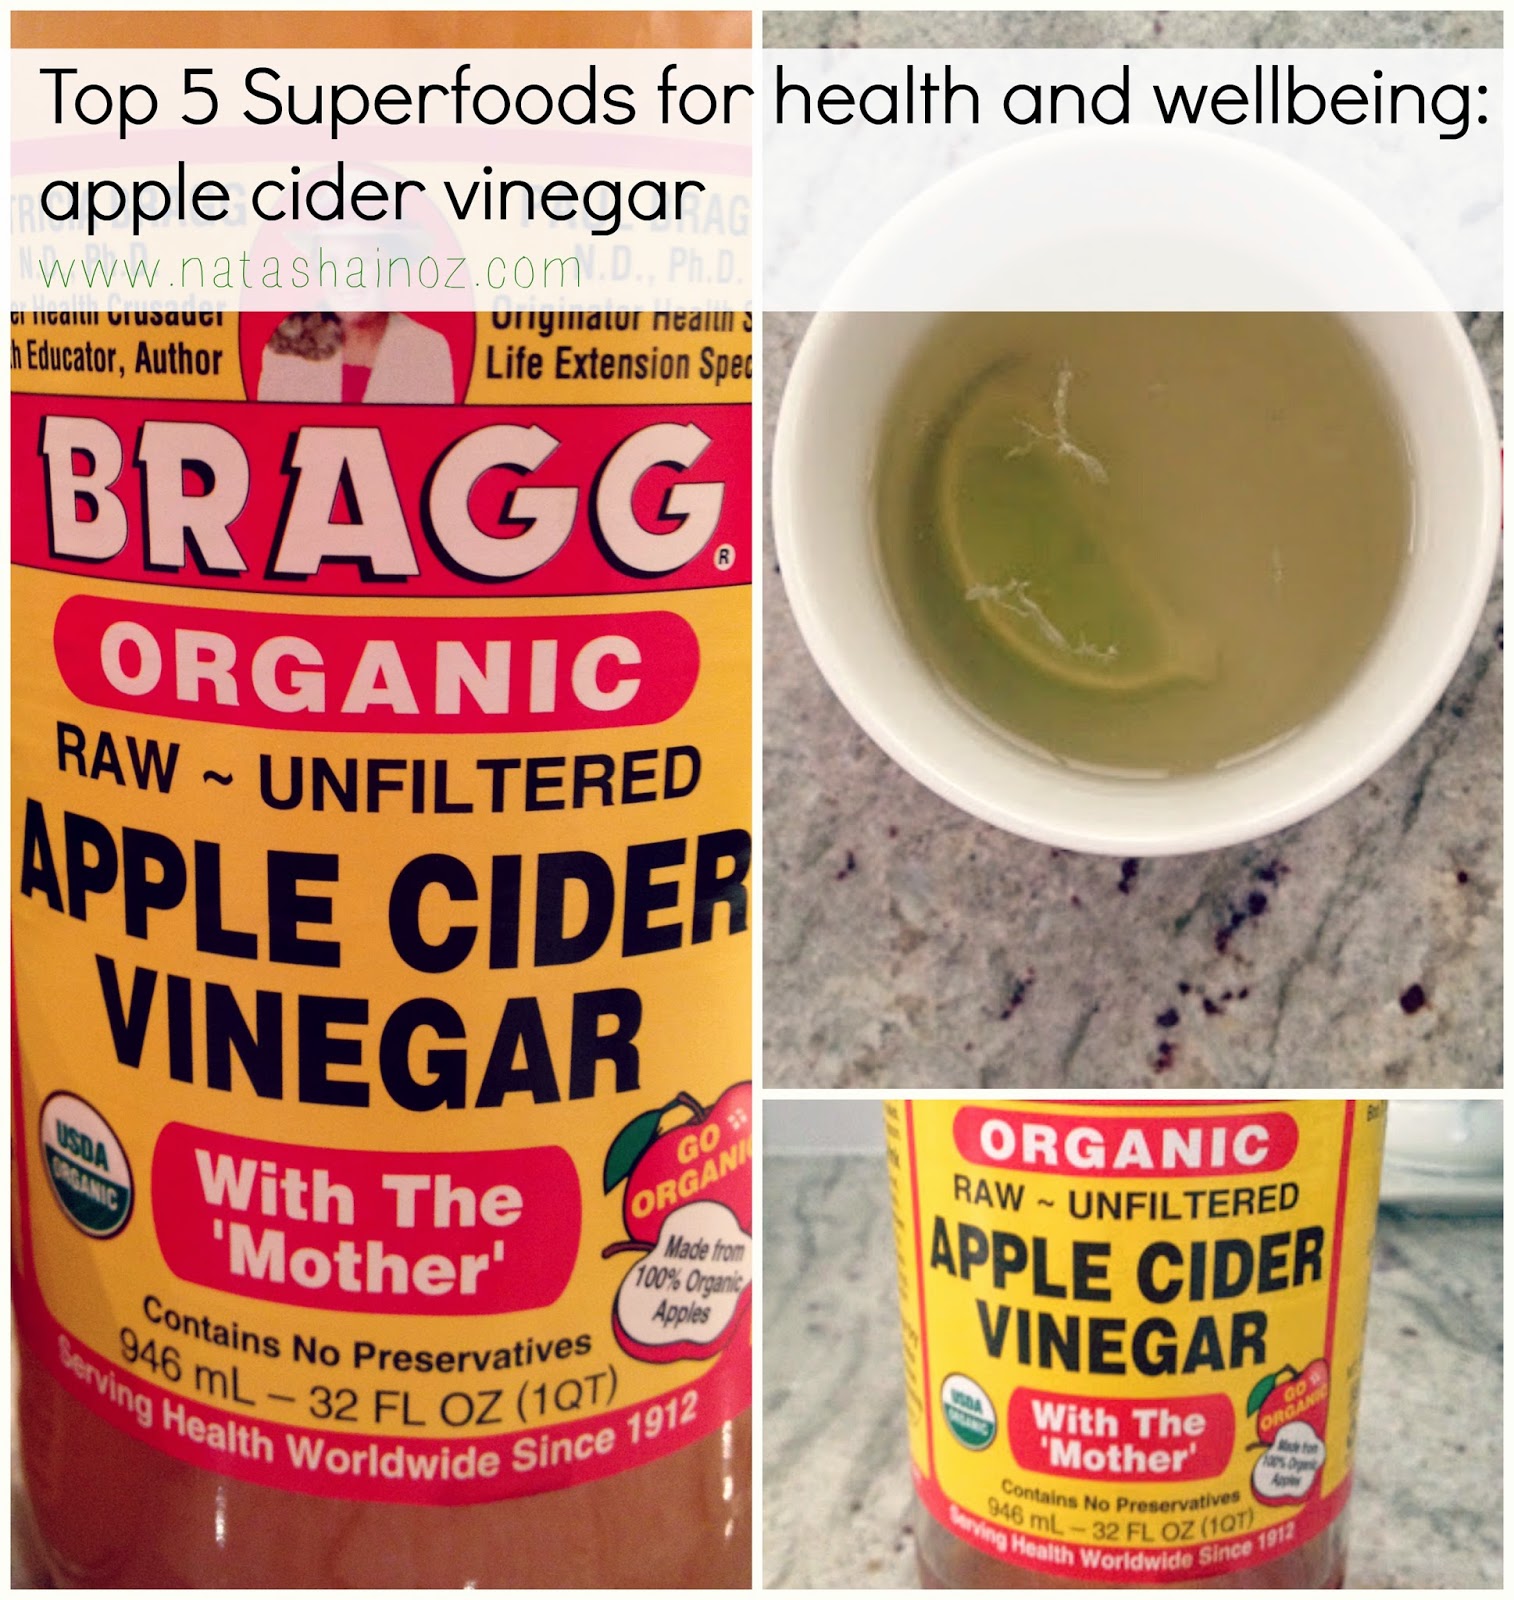 Top 5 Superfoods For Health and Wellbeing, Natasha in Oz, apple cider vinegar